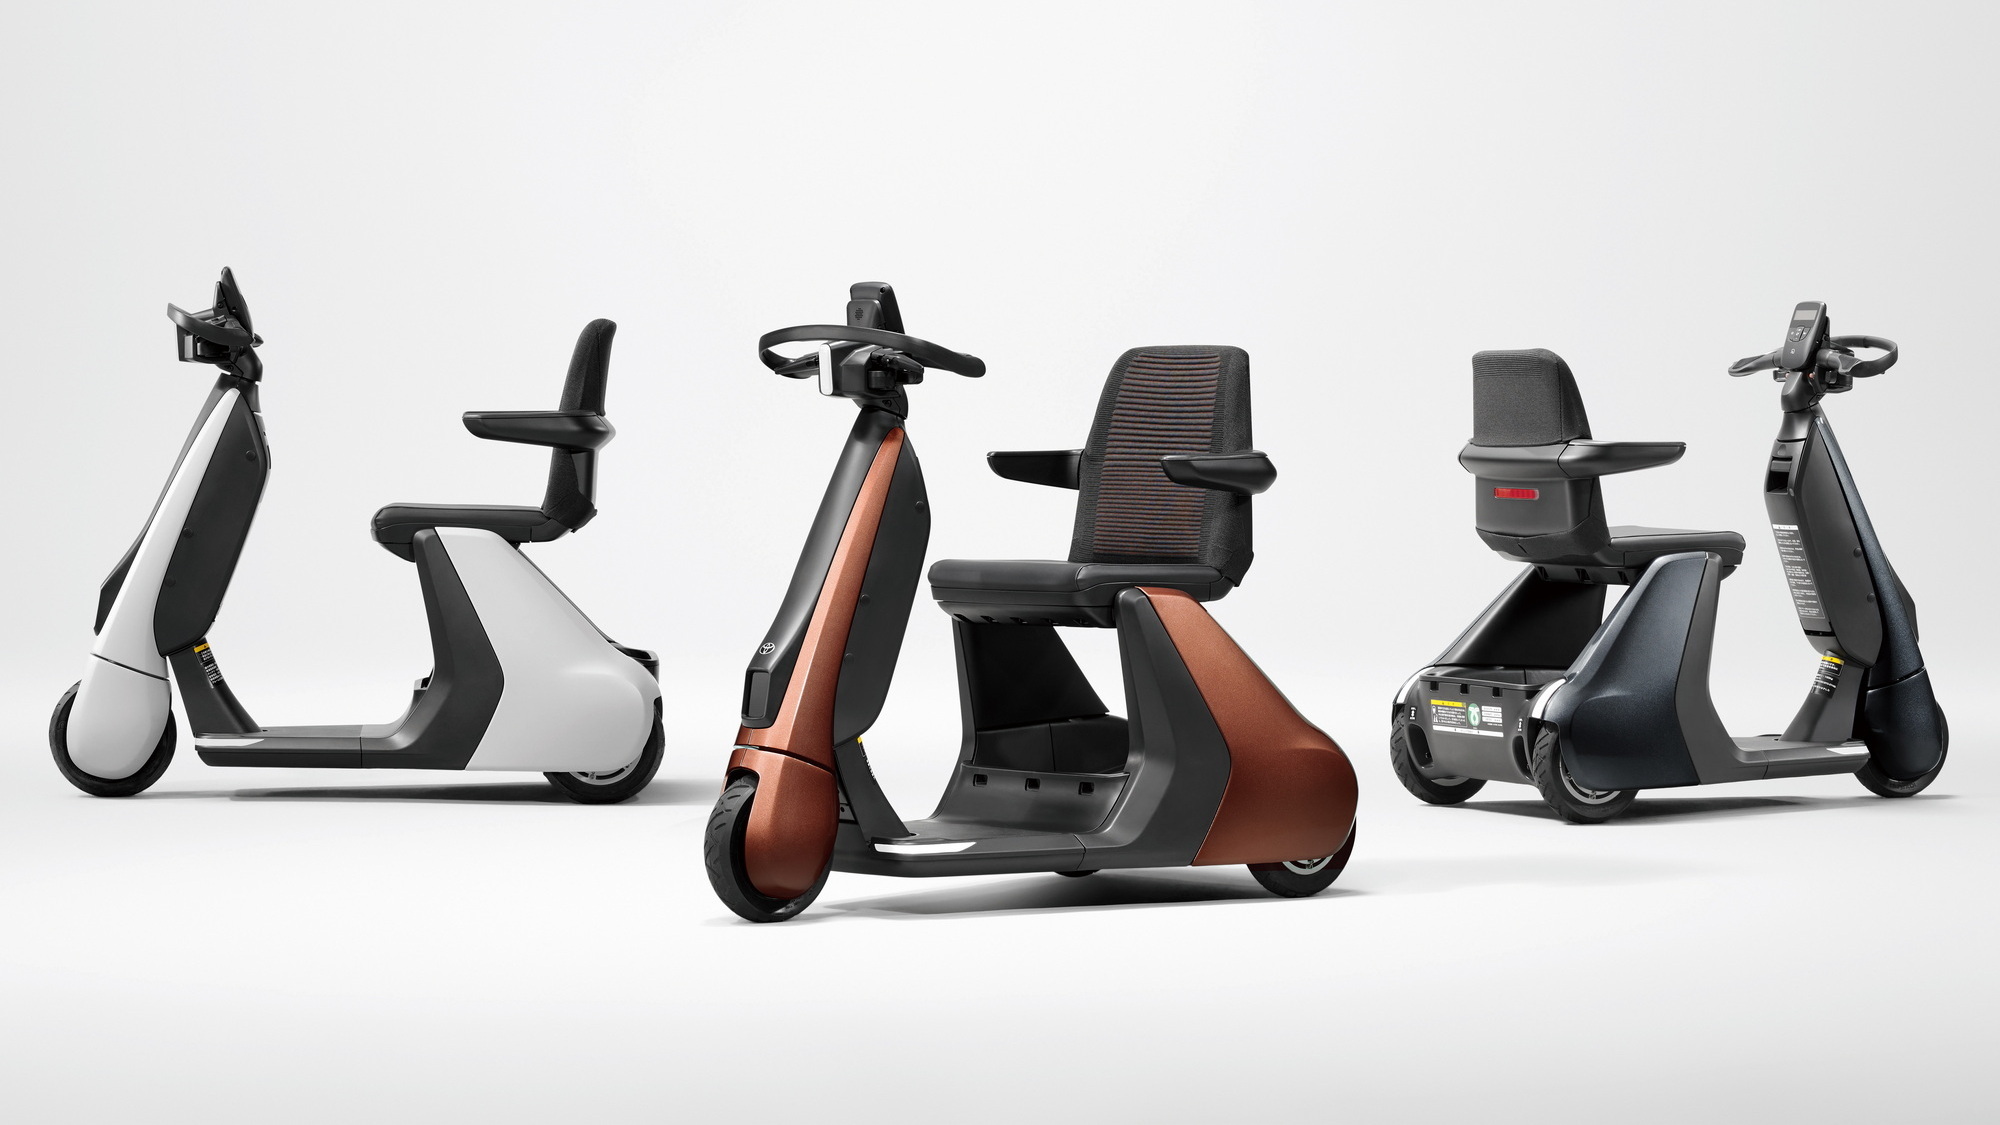 New Toyota C+Walk S Is Sleek Scooter For Japan's Aging Population